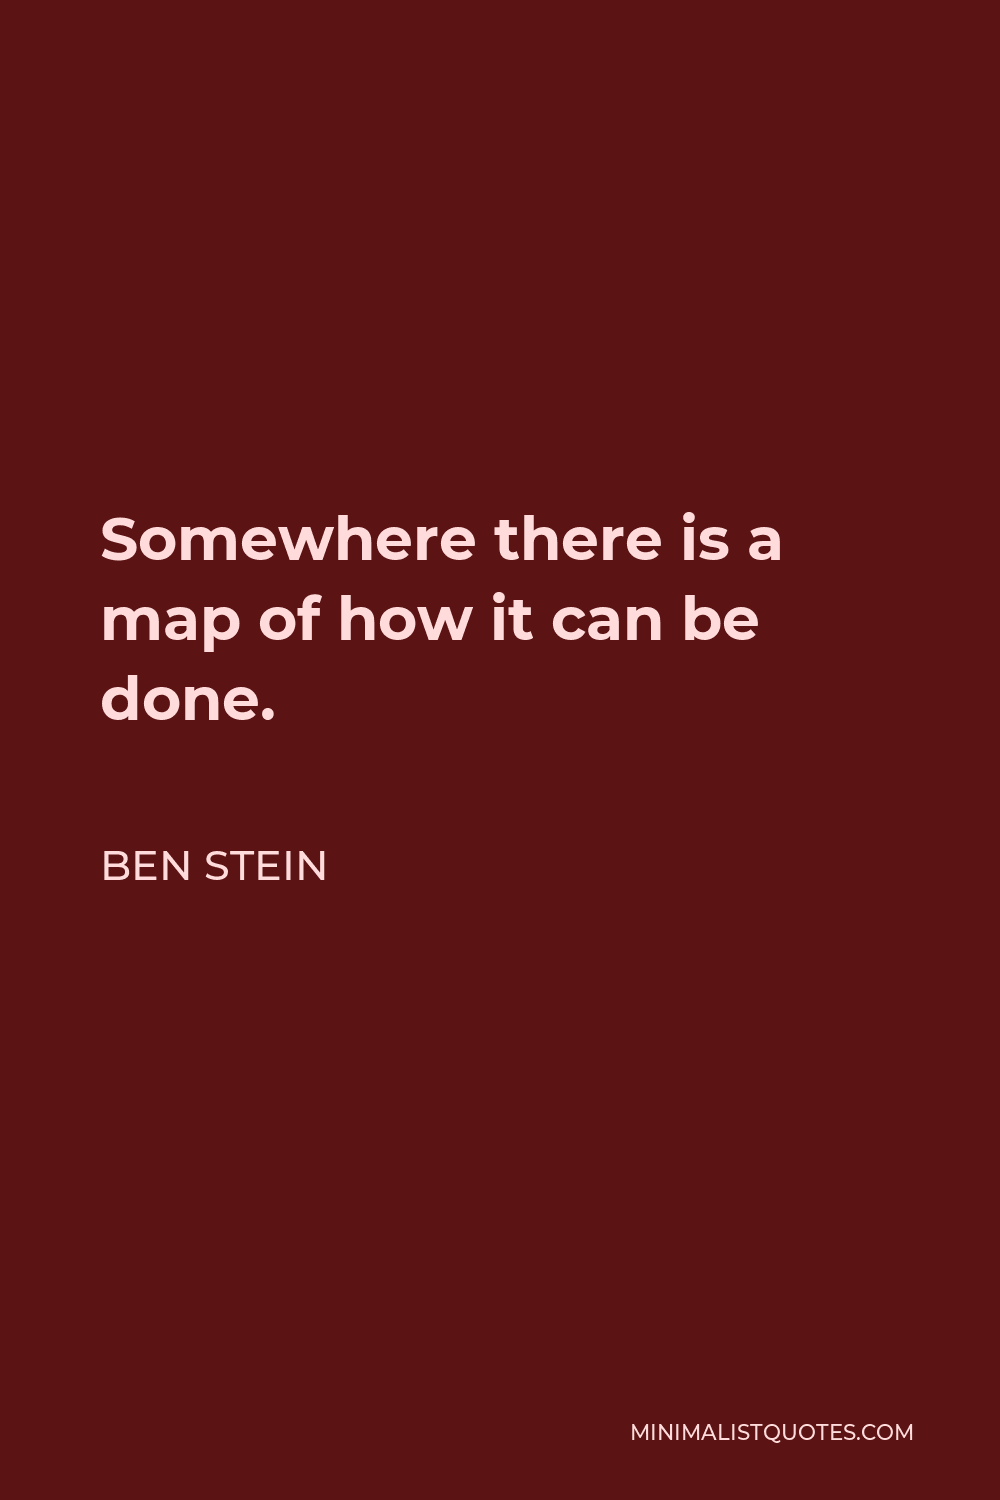 Ben Stein Quote - Somewhere there is a map of how it can be done.